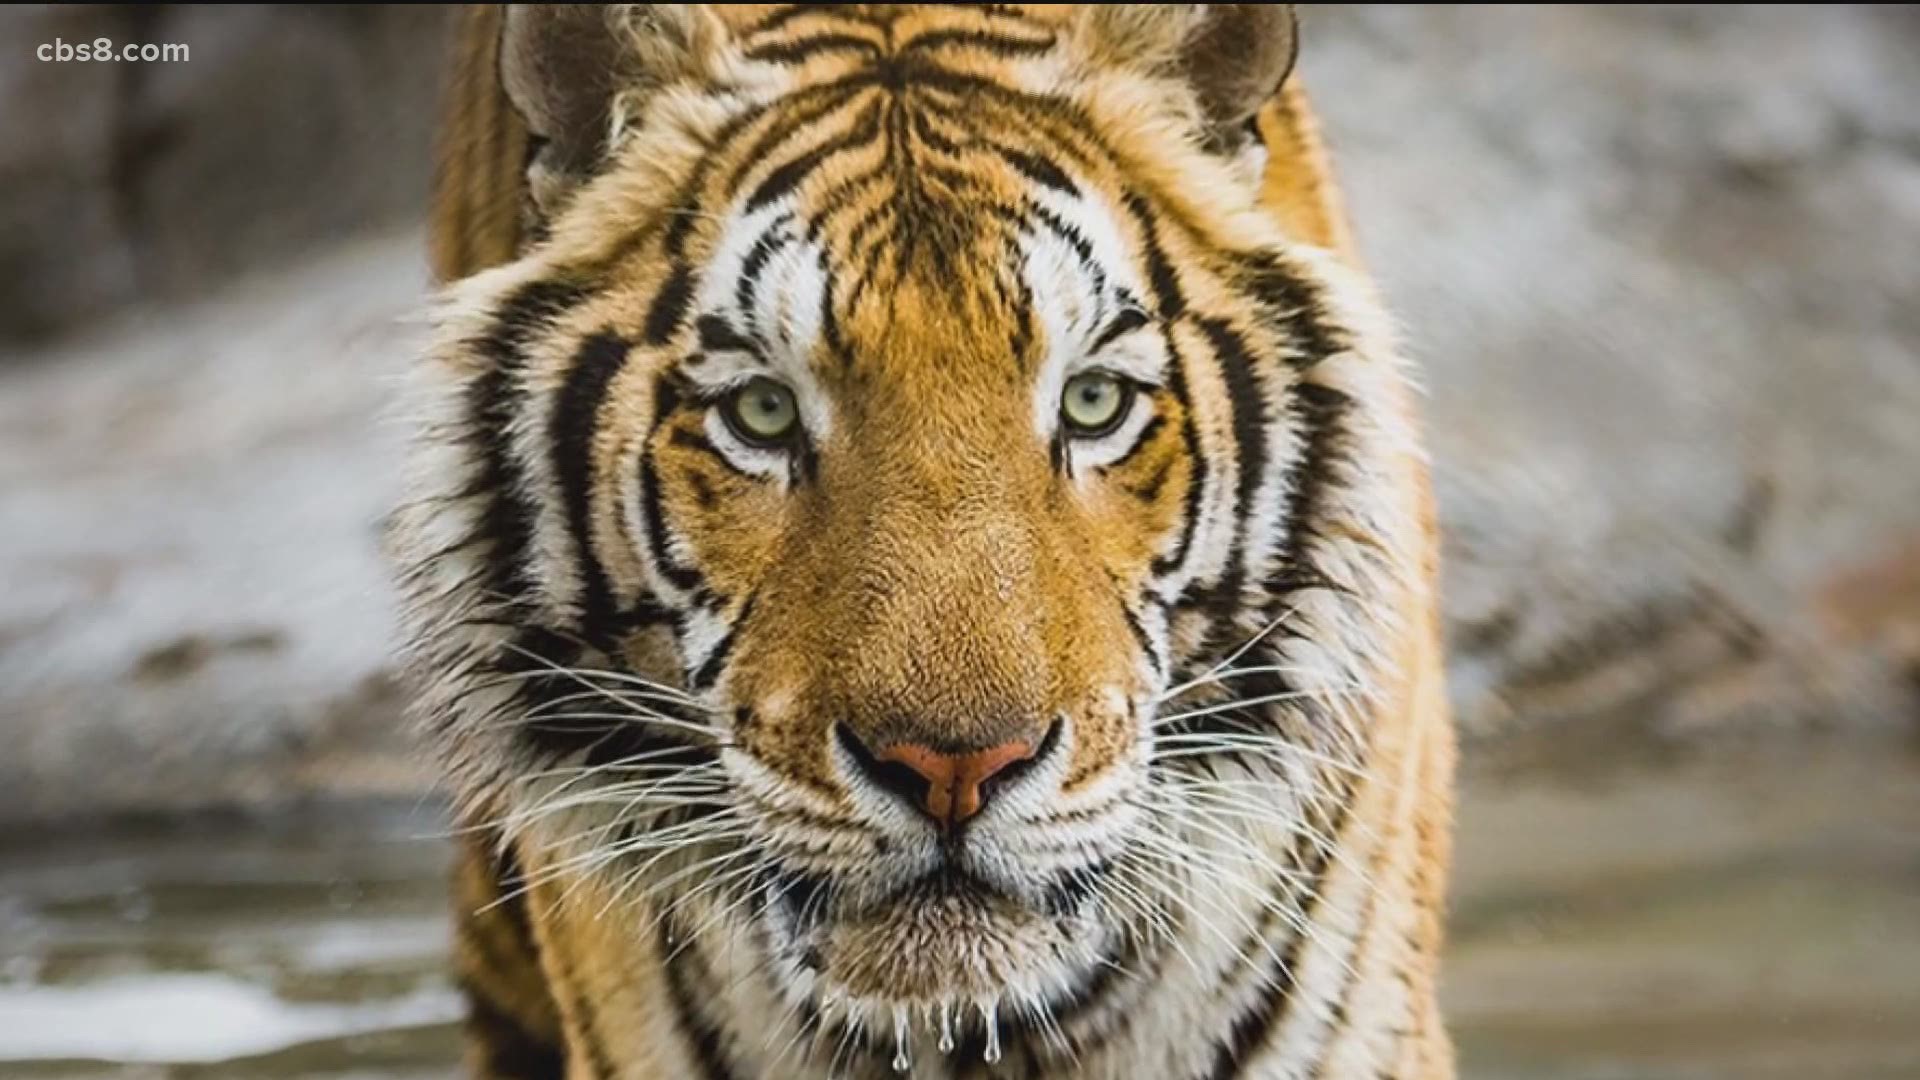 The 7-year-old tiger, Maverick, suffered fatal injuries inflicted by another tiger according to founder Bobbi Brink.